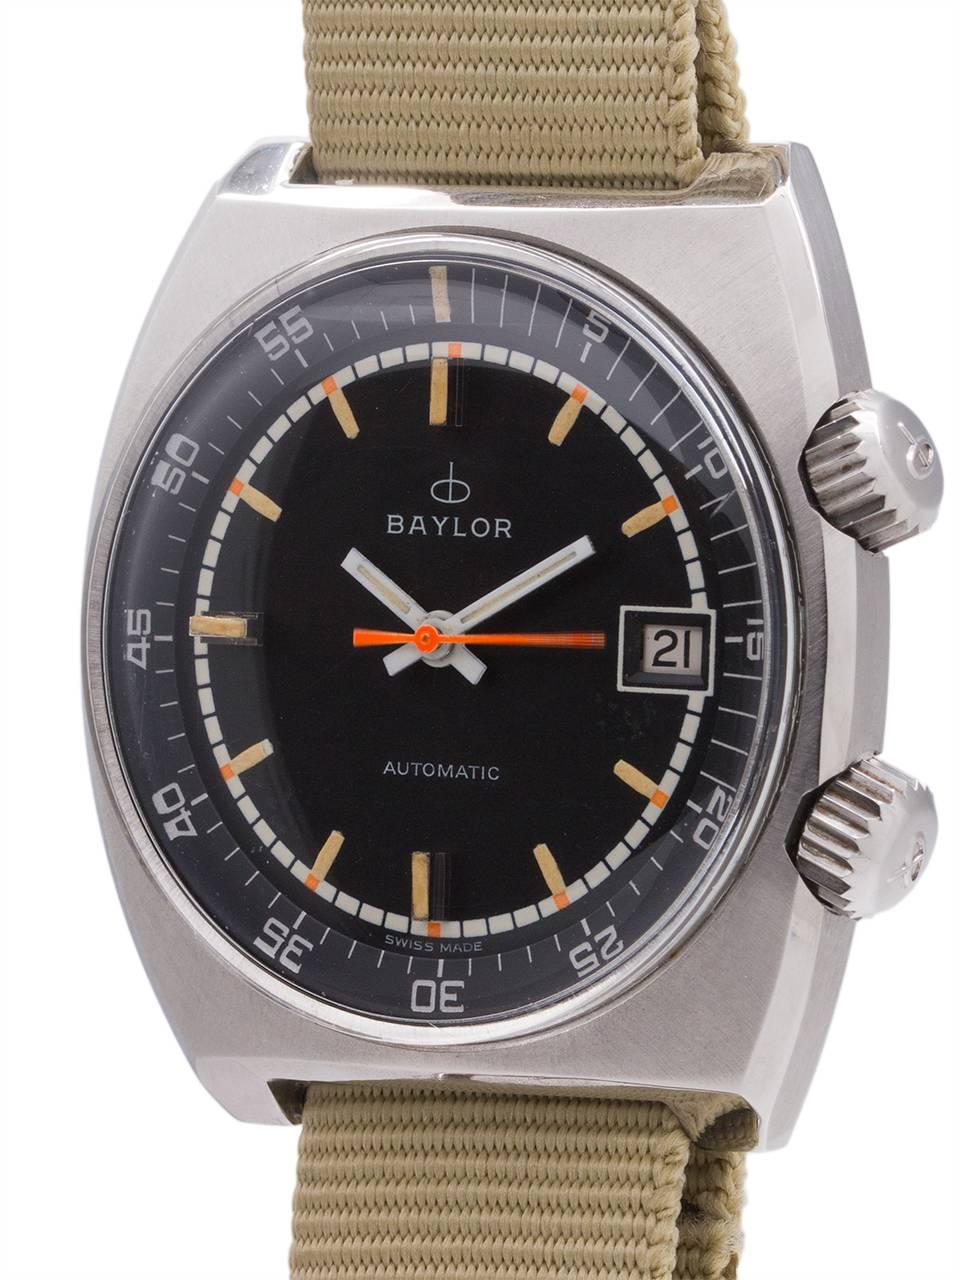 1970’s Swiss Baylor stainless steel Diver's model offered on a sporty NATO style strap. The color scheme may be the most interesting thing about this funky ’70’s diver. With a matte black dial, a thin white minute track with orange and yellow hour